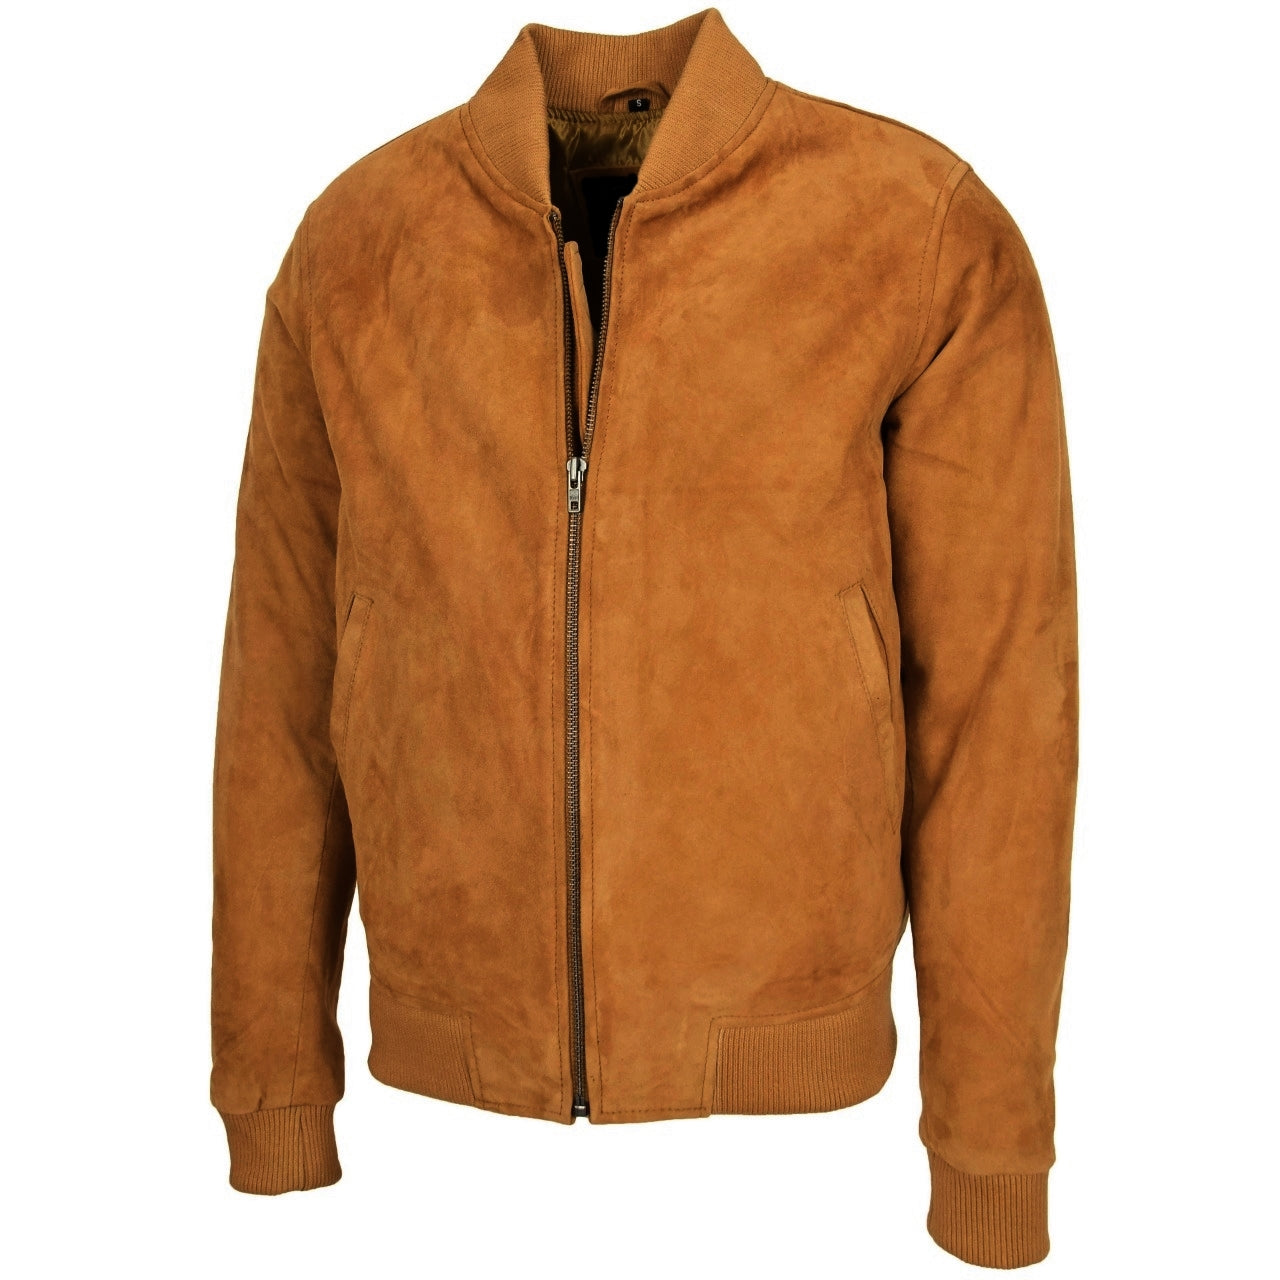 A2 Bomber Men's Brown Suede Leather Jacket